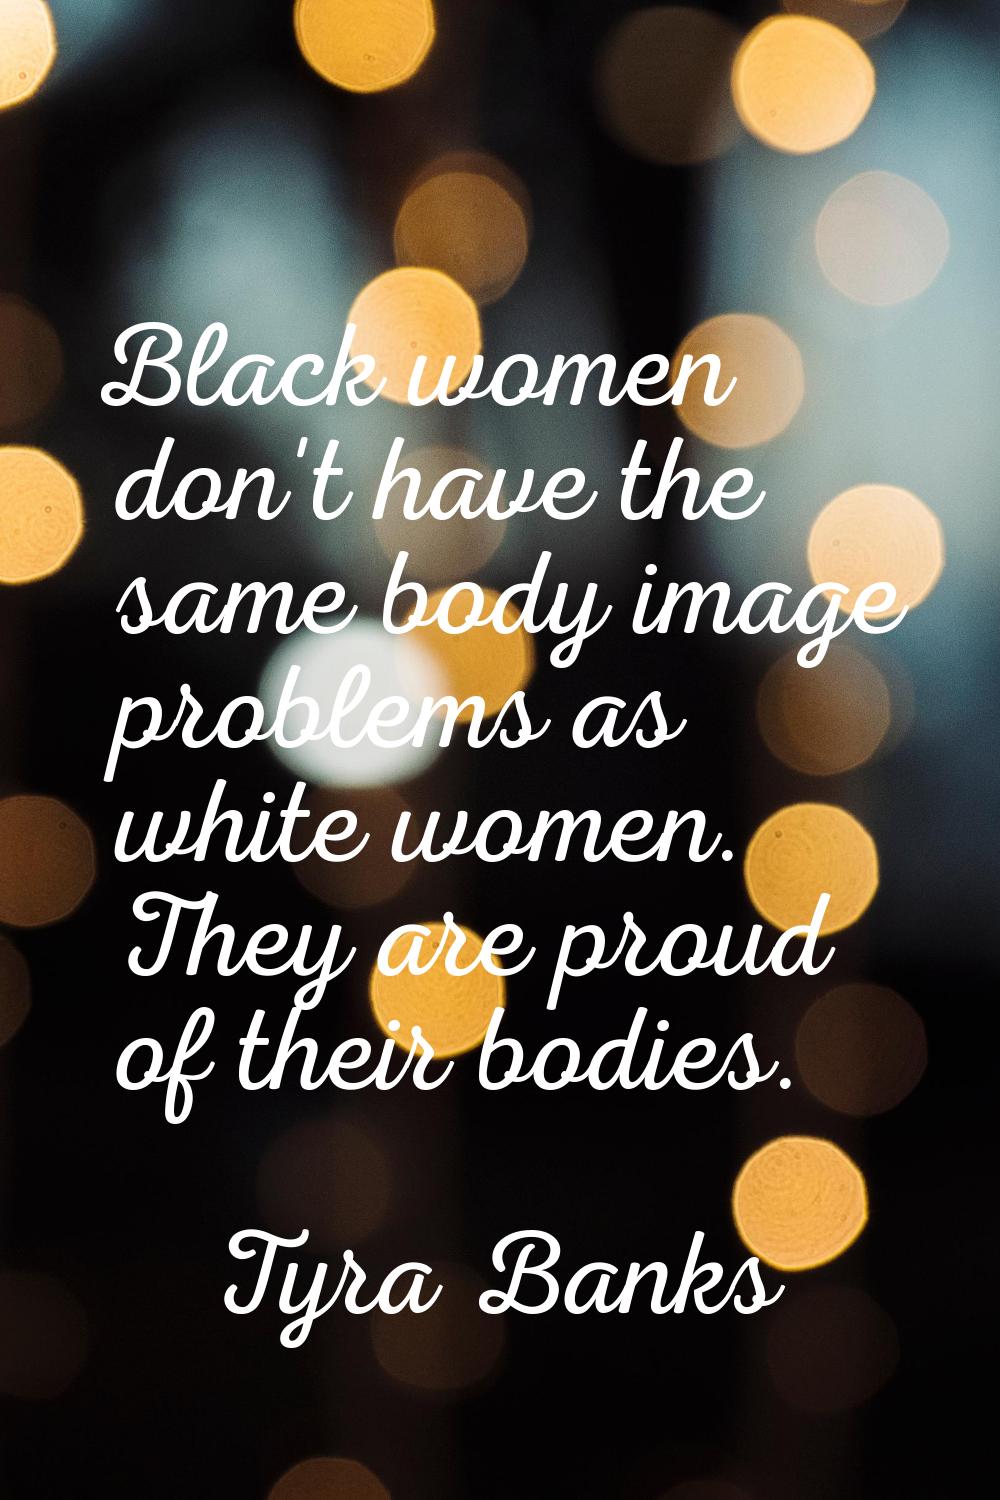 Black women don't have the same body image problems as white women. They are proud of their bodies.